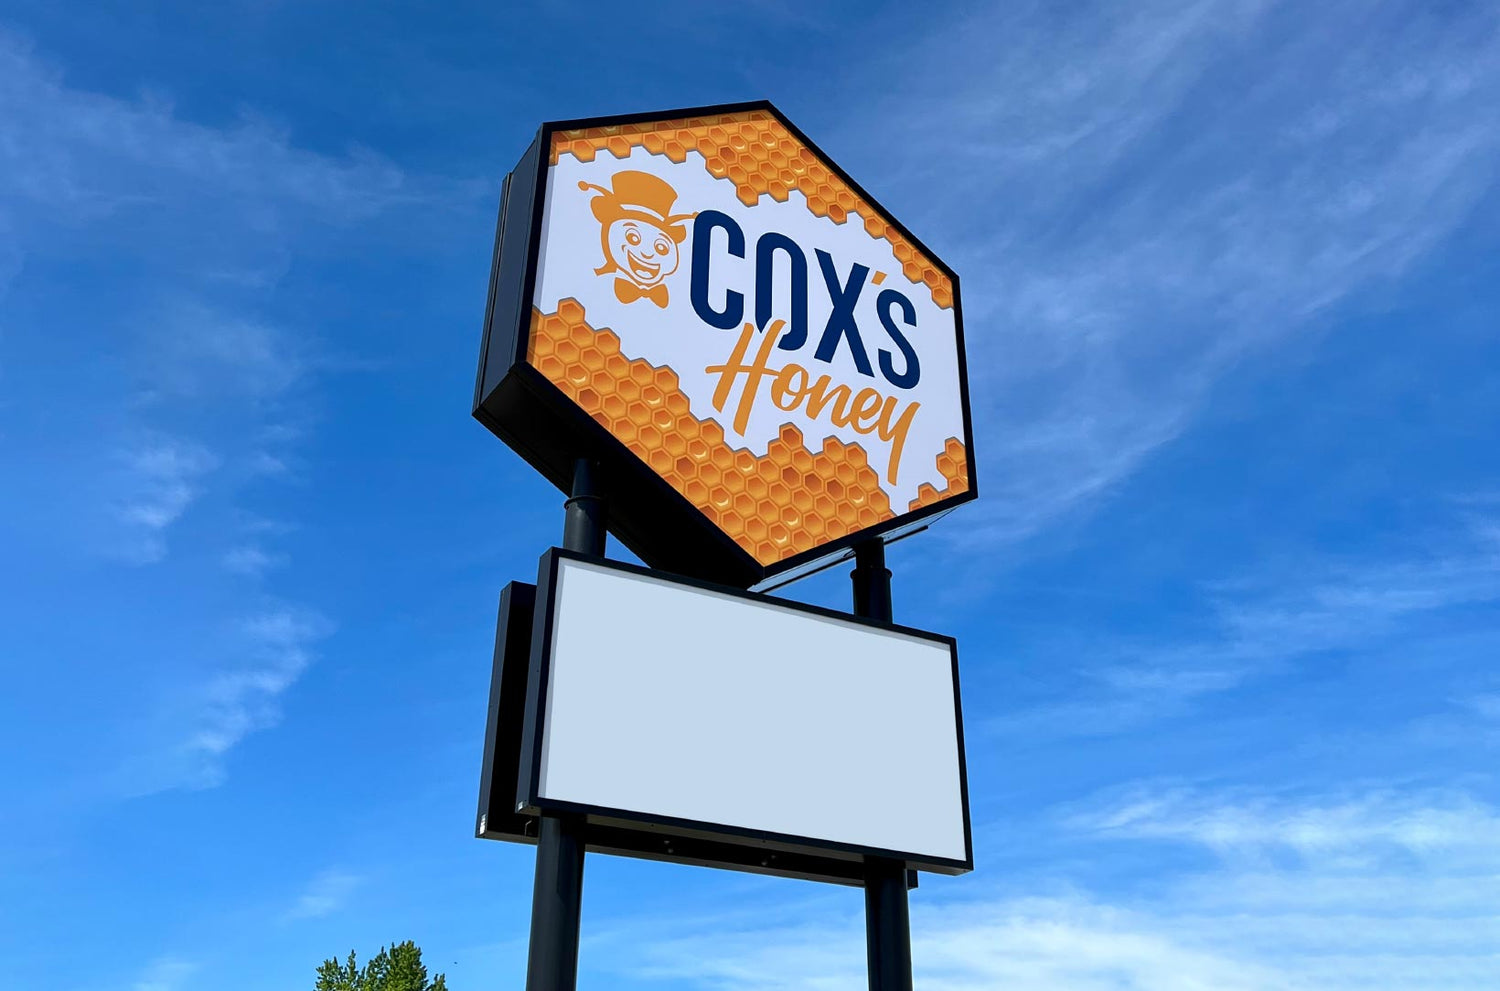 Coxs Honey Small Business of the Month